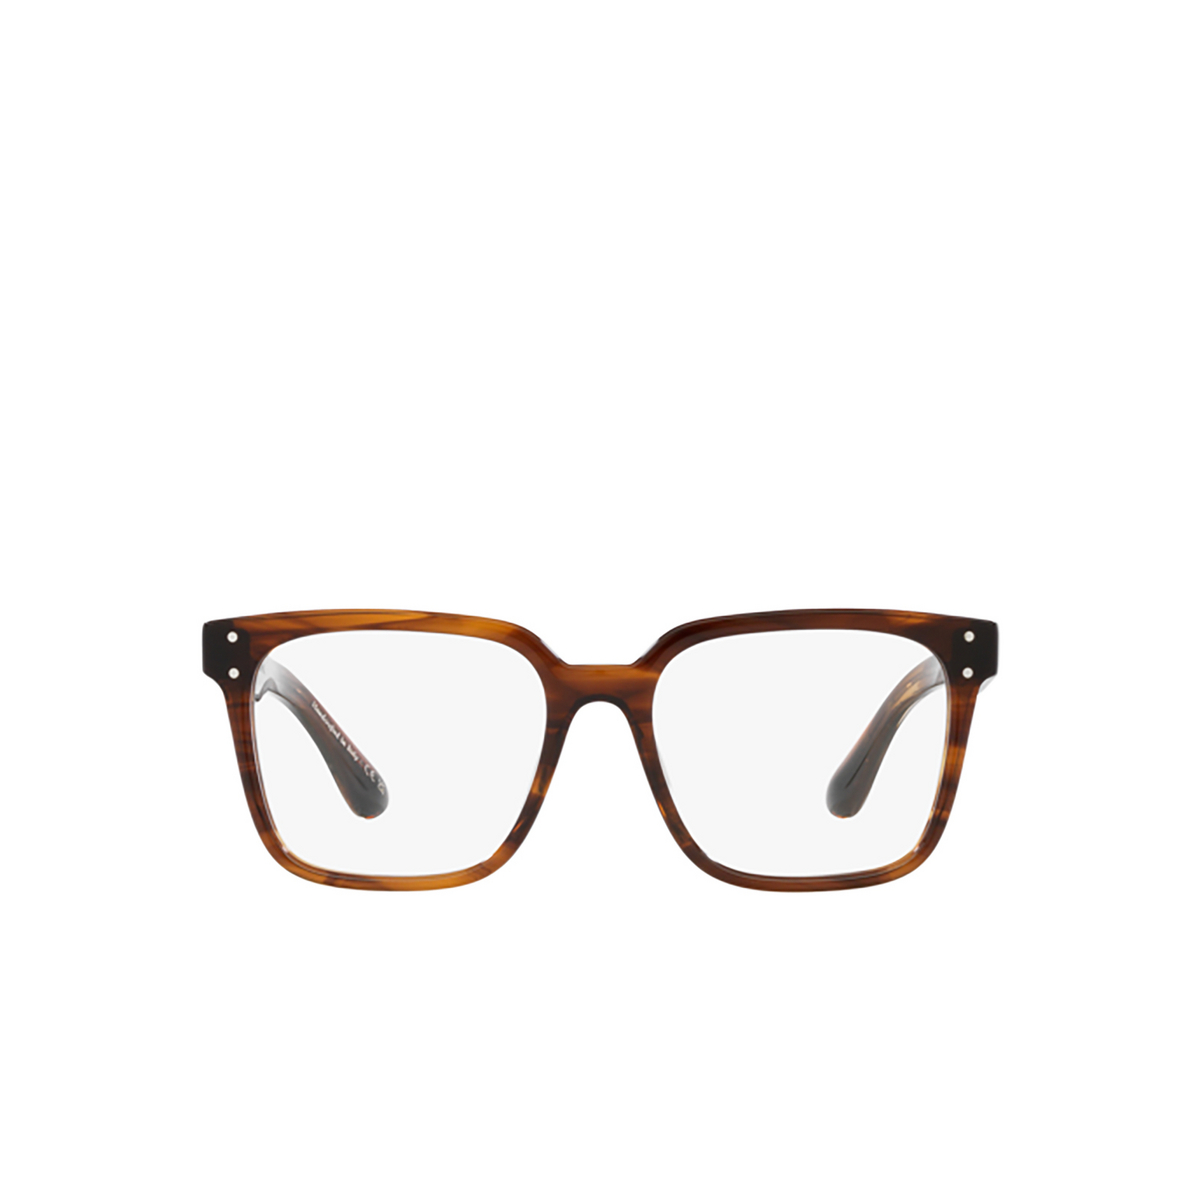 Occhiali da vista Oliver Peoples PARCELL 1724 Tuscany Tortoise - frontale